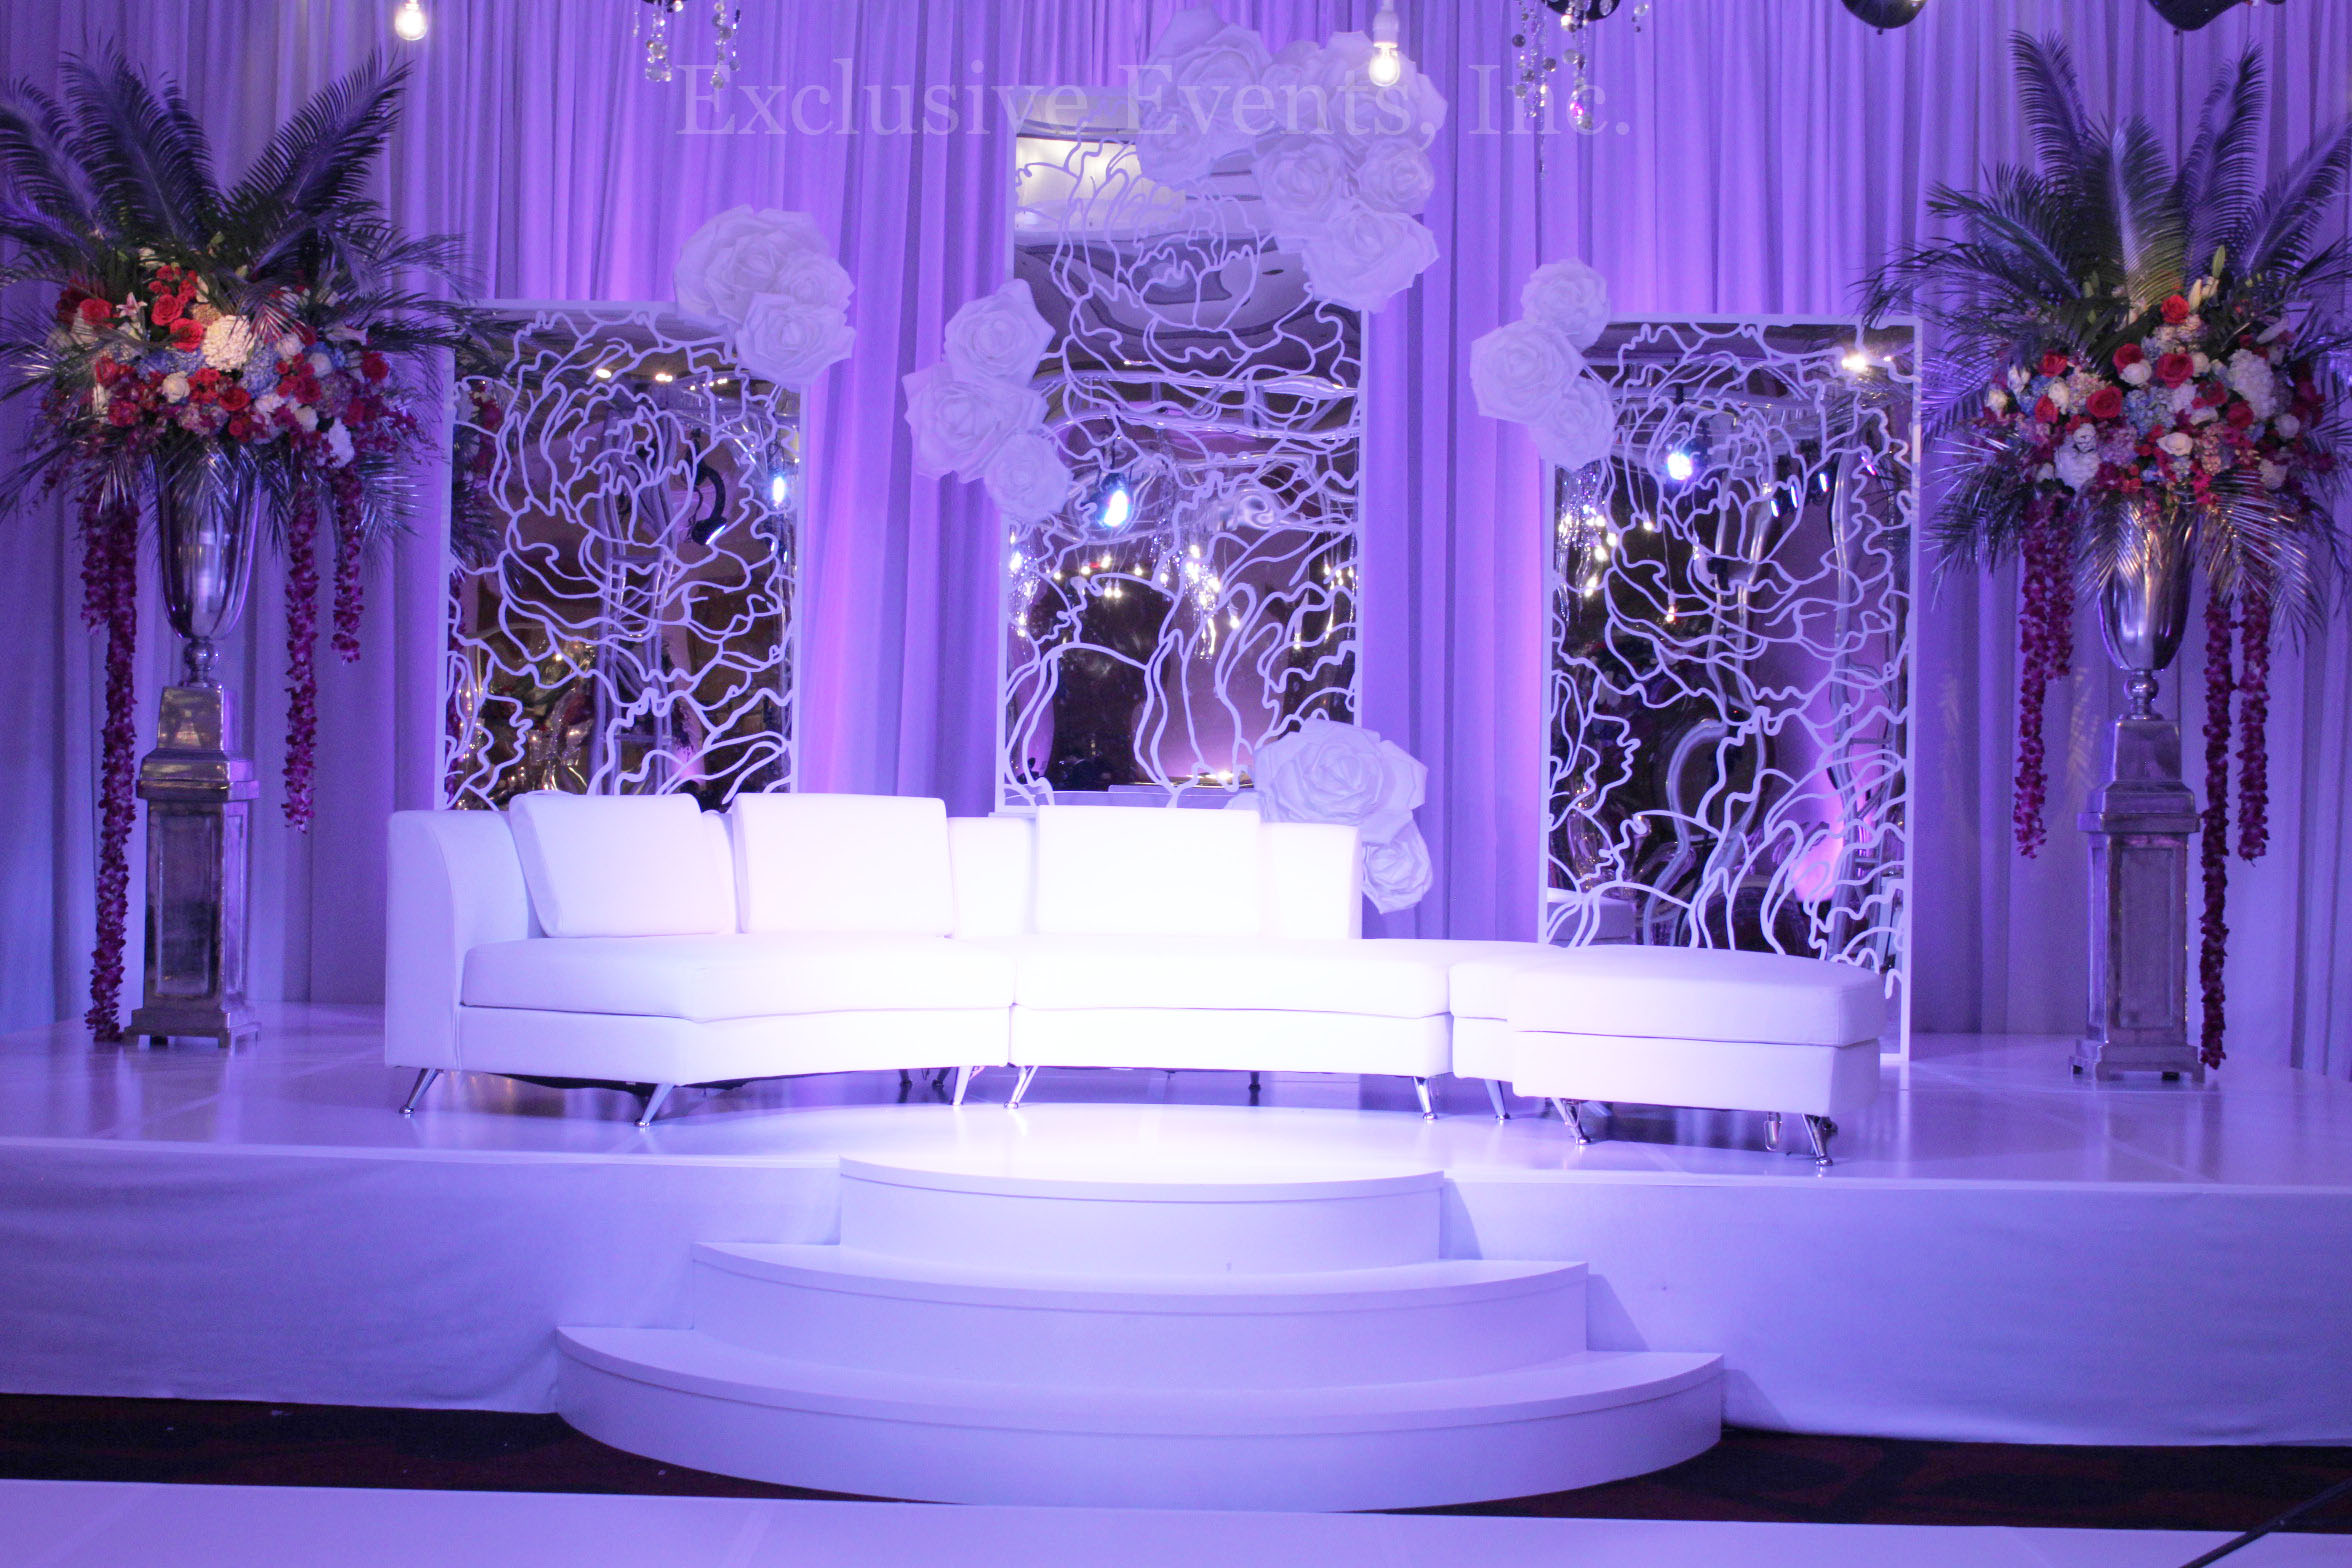 Exclusive Events - Staging, Backdrops, and Dance Floors